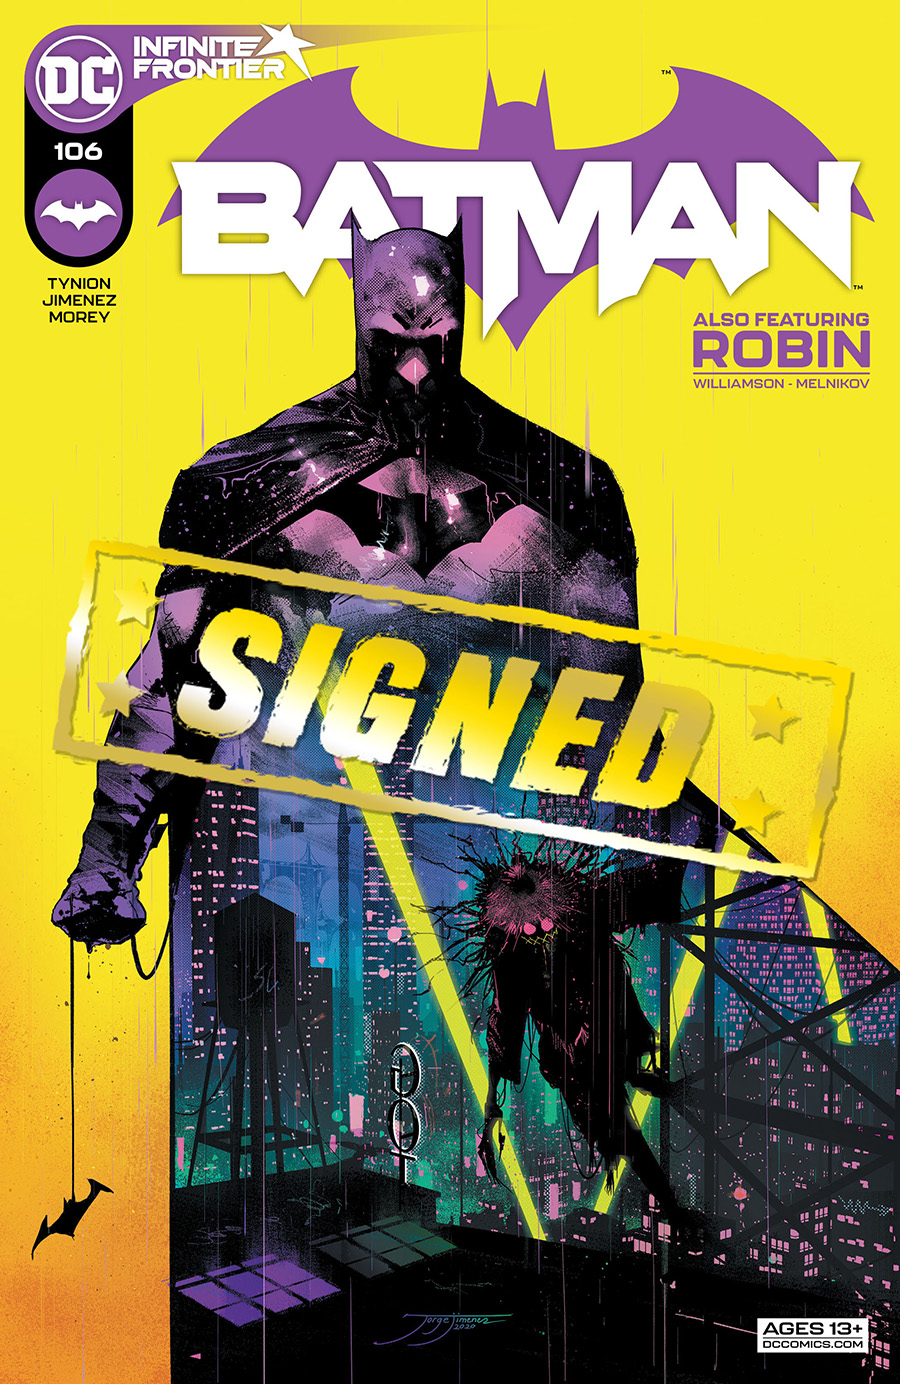 Batman Vol 3 #106 Cover F DF Gold Signature Series Signed By James Tynion IV